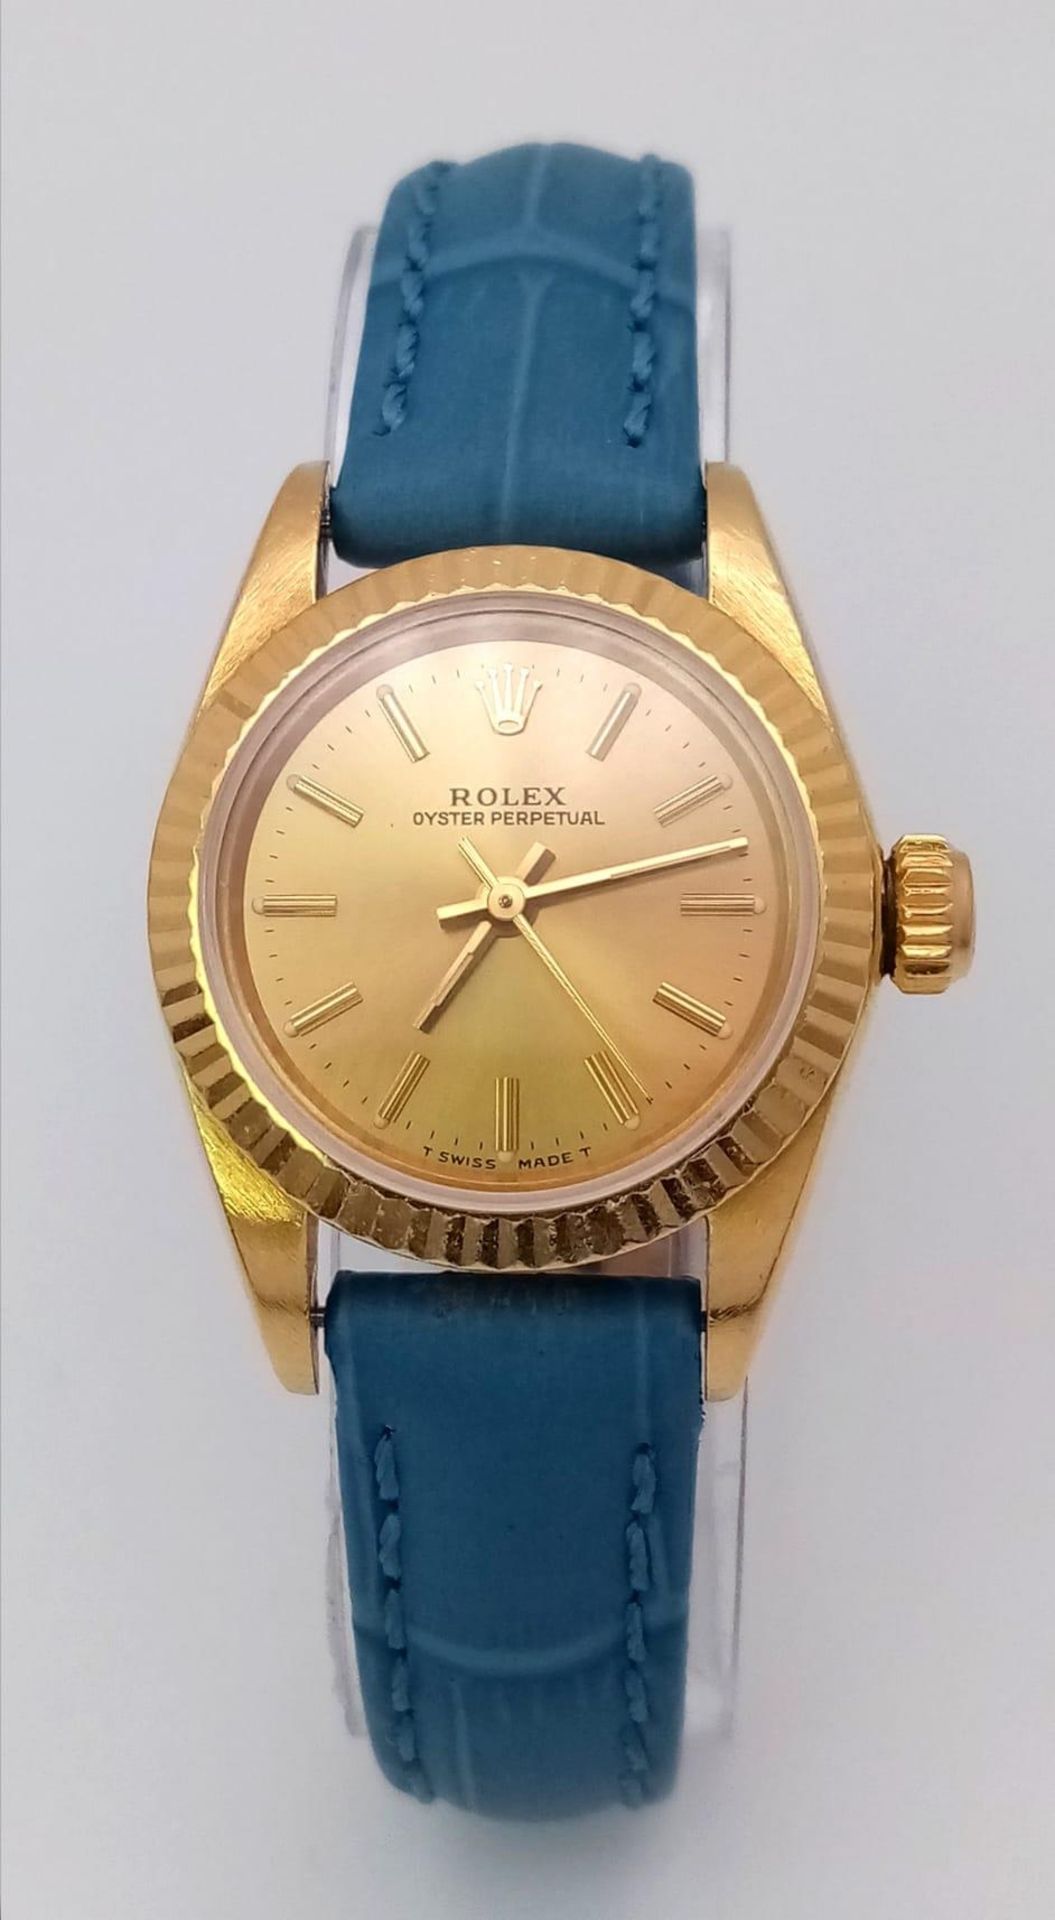 An 18k Gold Rolex Oyster Perpetual Ladies Watch. Blue leather strap. 18k gold case - 25mm. Gold tone - Image 3 of 10